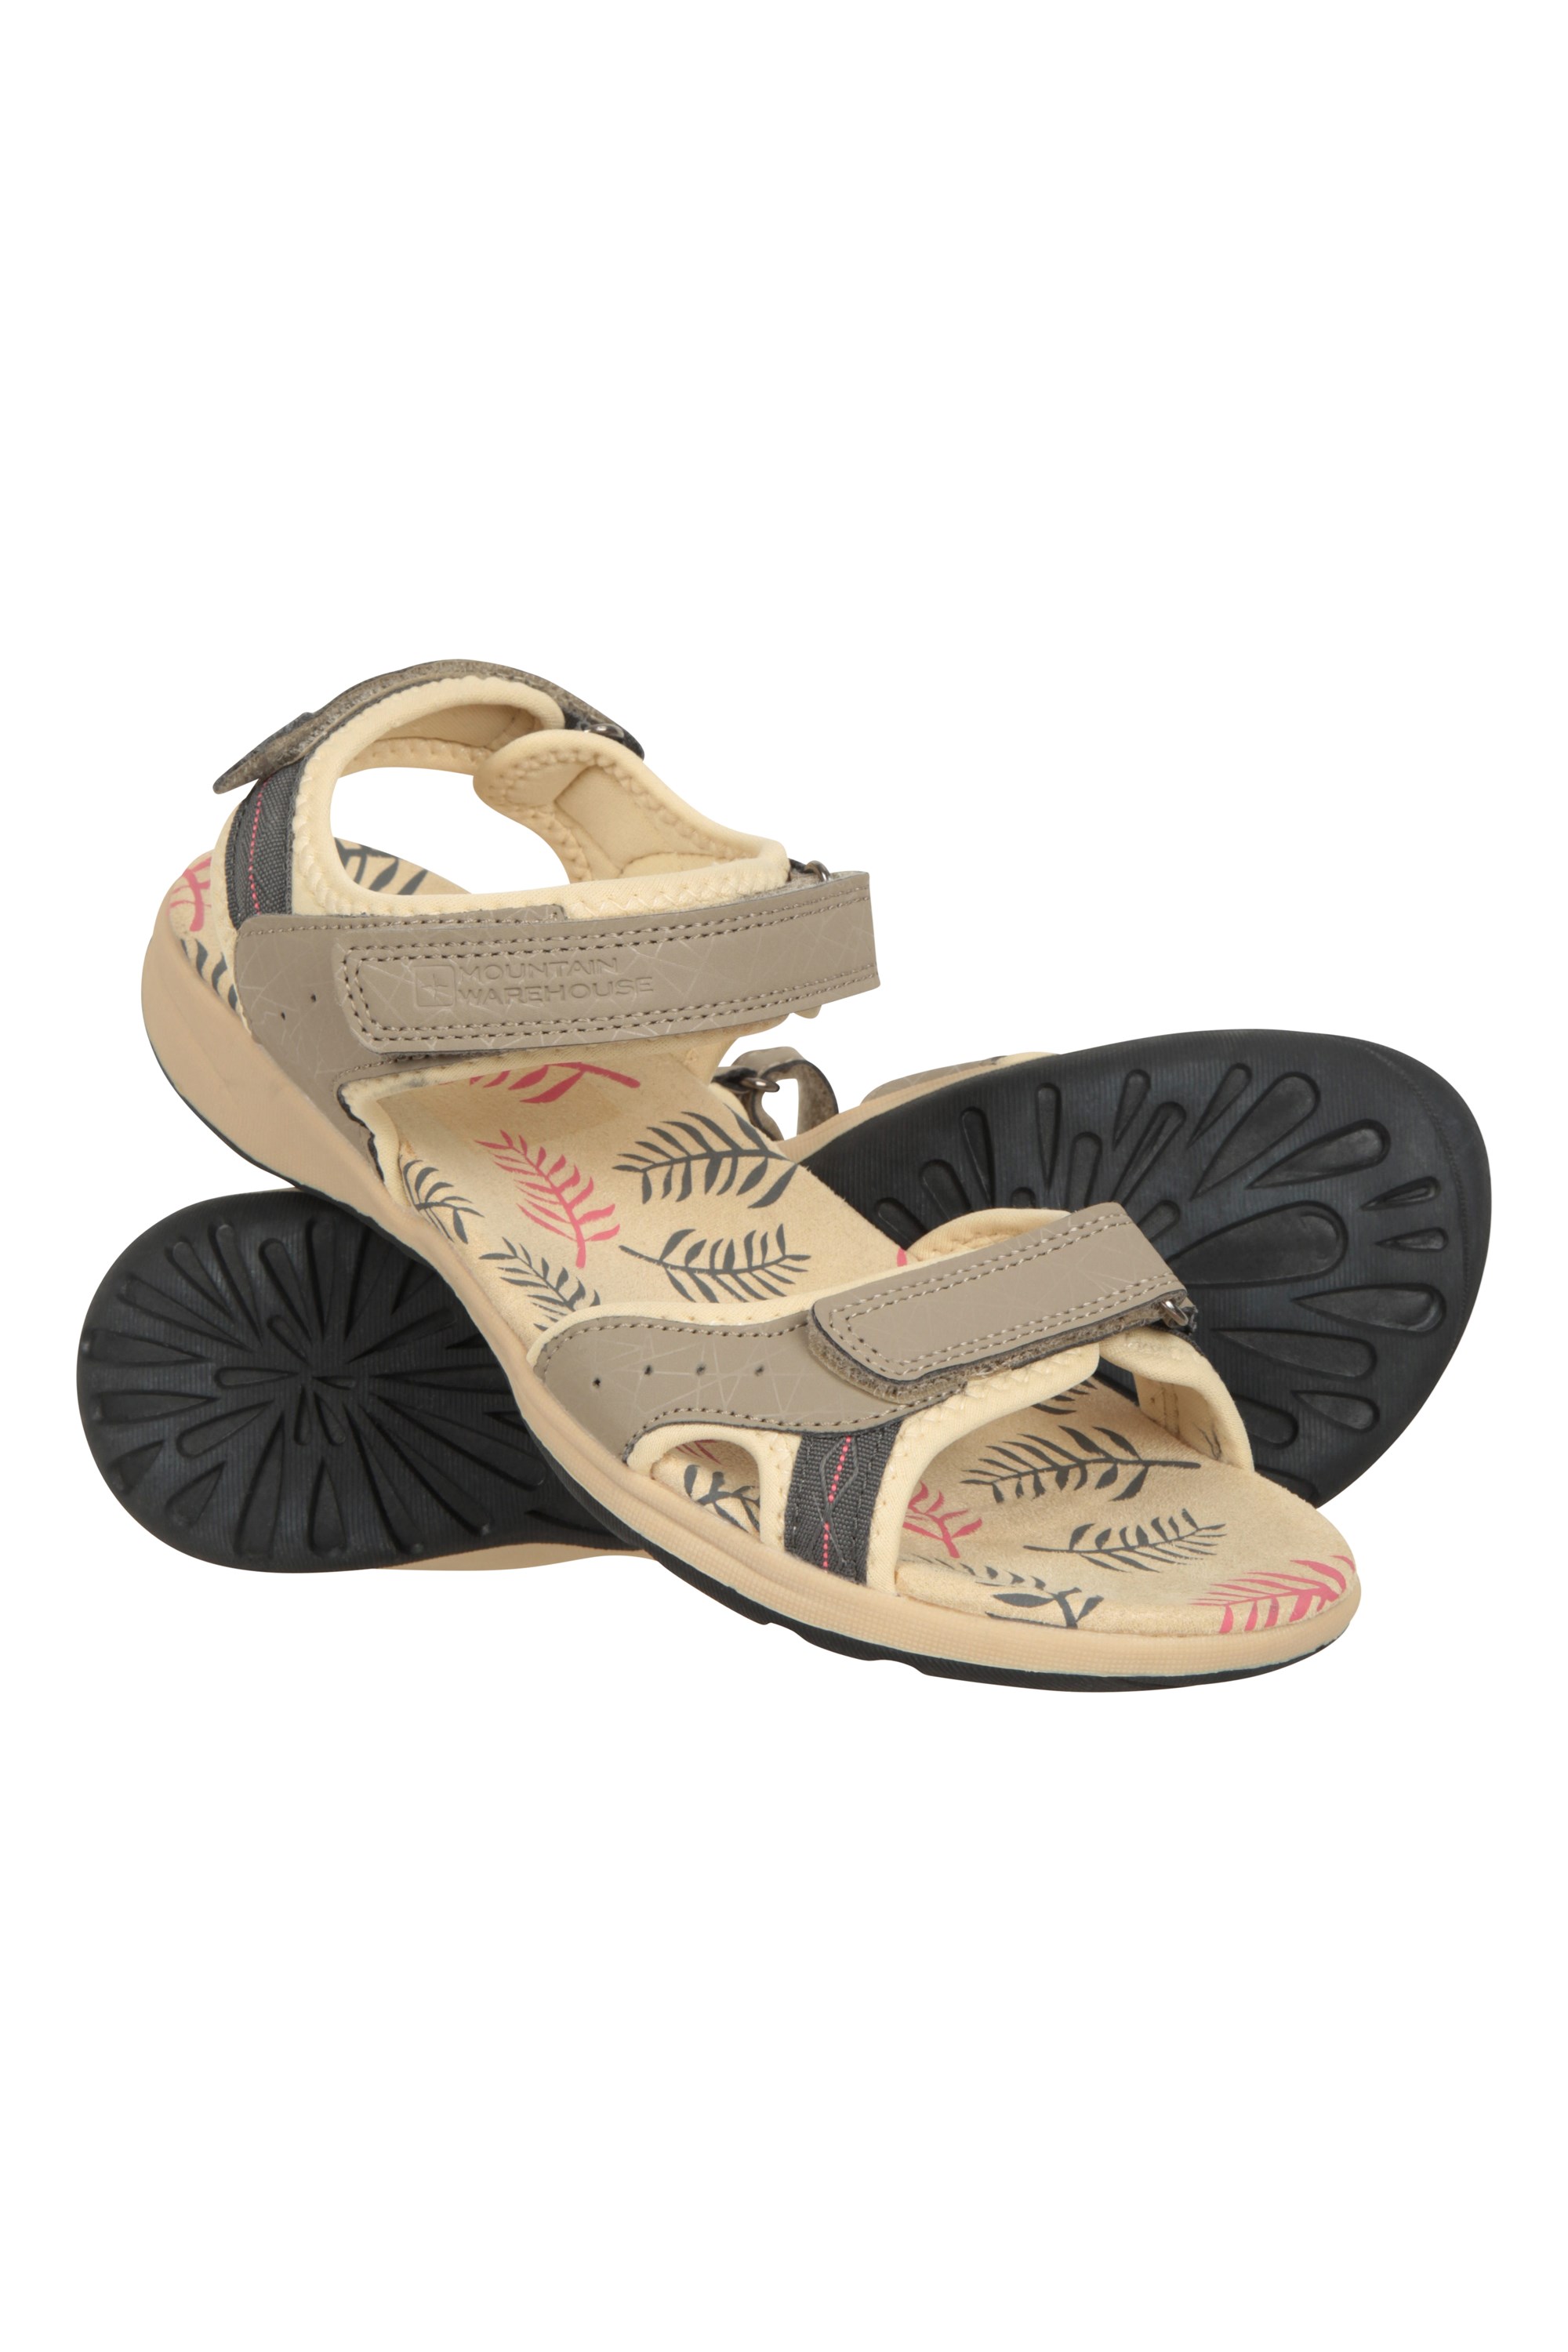 Athens Printed Womens Sandals - Beige